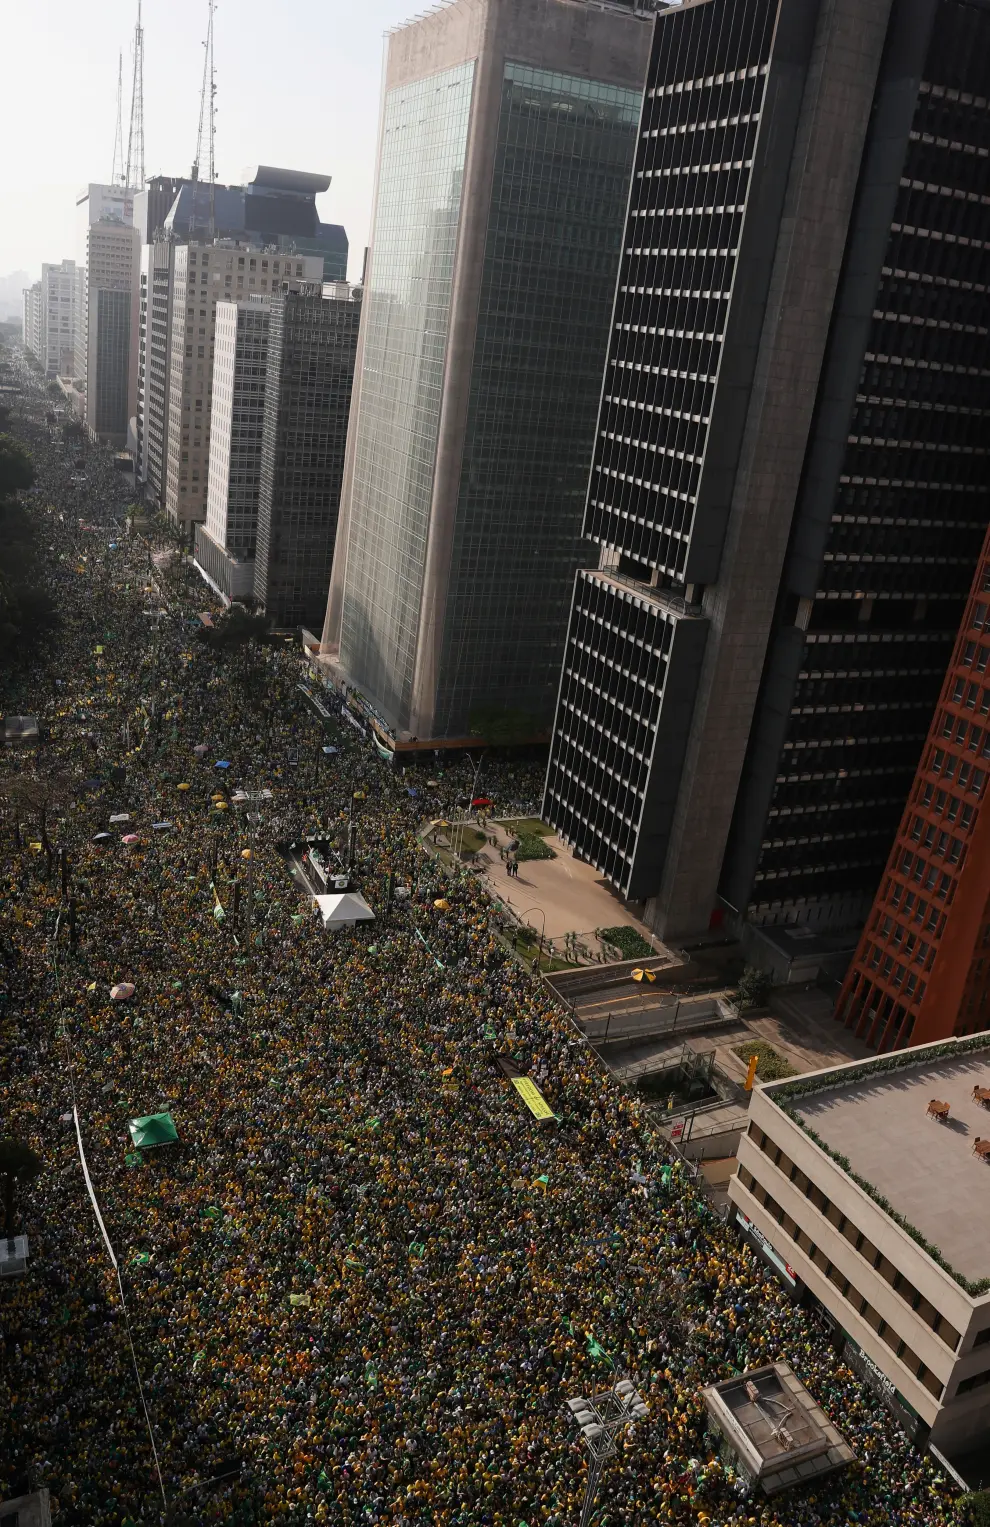 Supporters of Brazilian President Bolsonaro gather to back the far-right leader in his dispute with the Supreme Court, in Sao Paulo